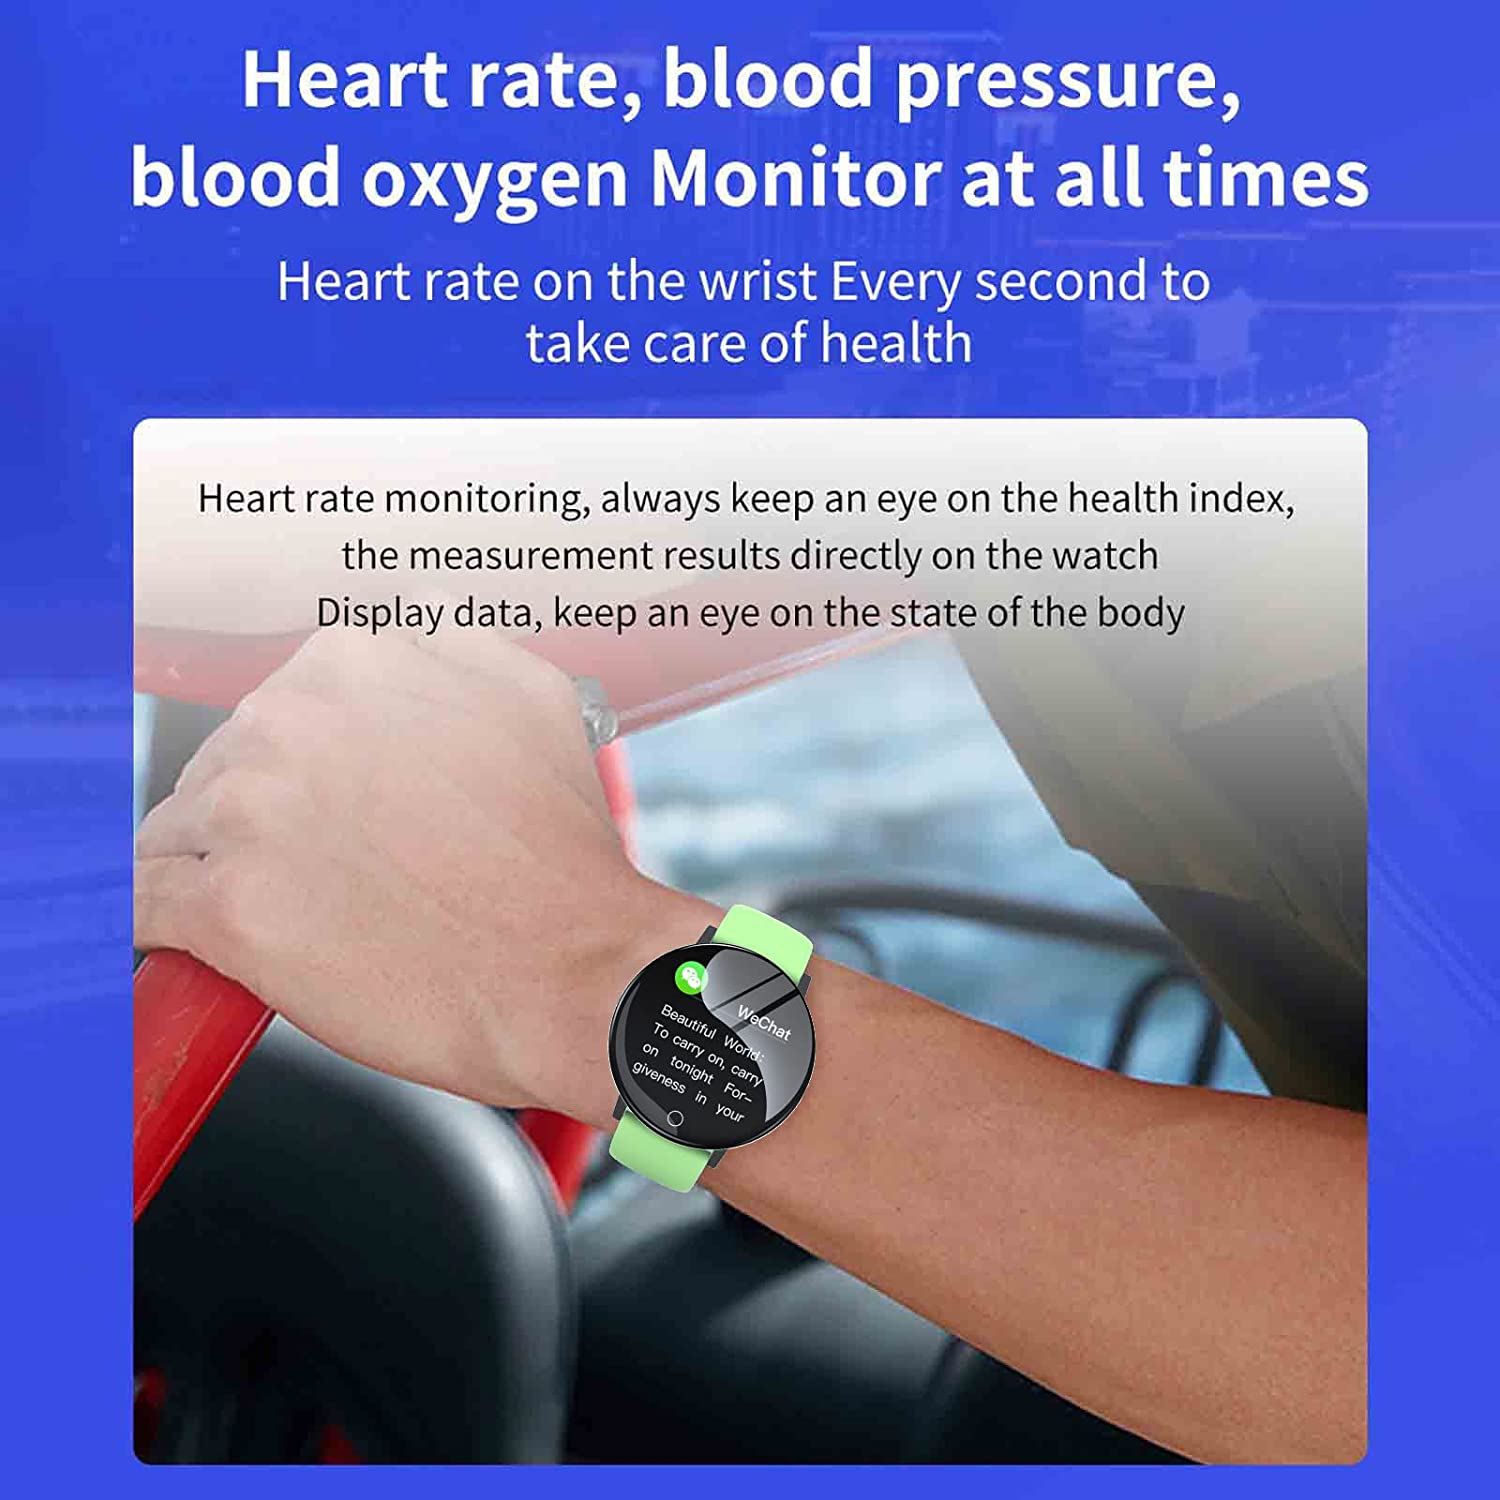 Byikun Smart Watch That Can Text and Call, 119S Fashion Smart Sports Watches Slim Design Waterproof, Activity Trackers and Smartwatches for iPhone Android, Smart Watch with Blood Pressure Monitor #A